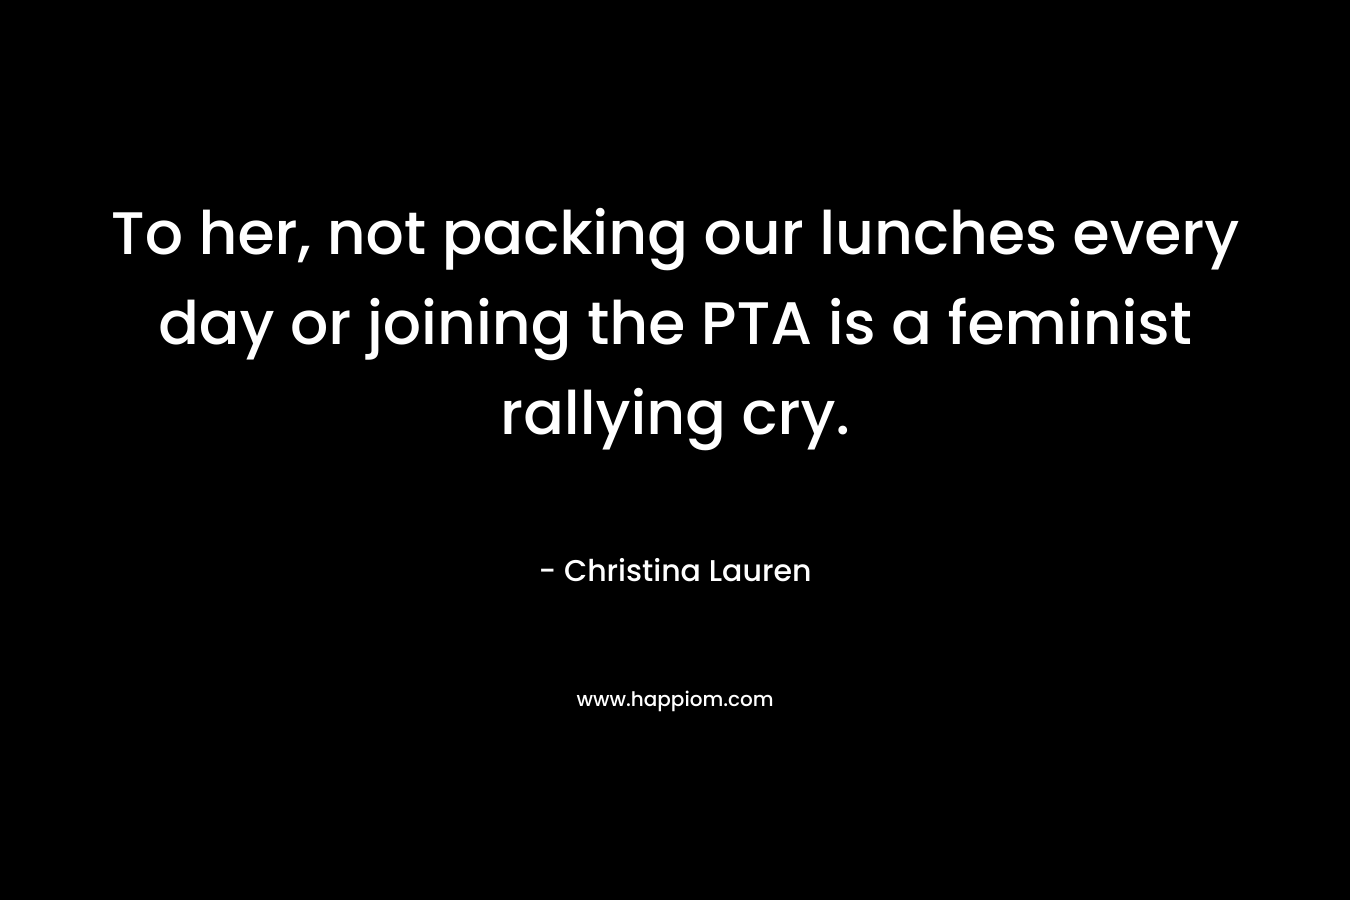 To her, not packing our lunches every day or joining the PTA is a feminist rallying cry.